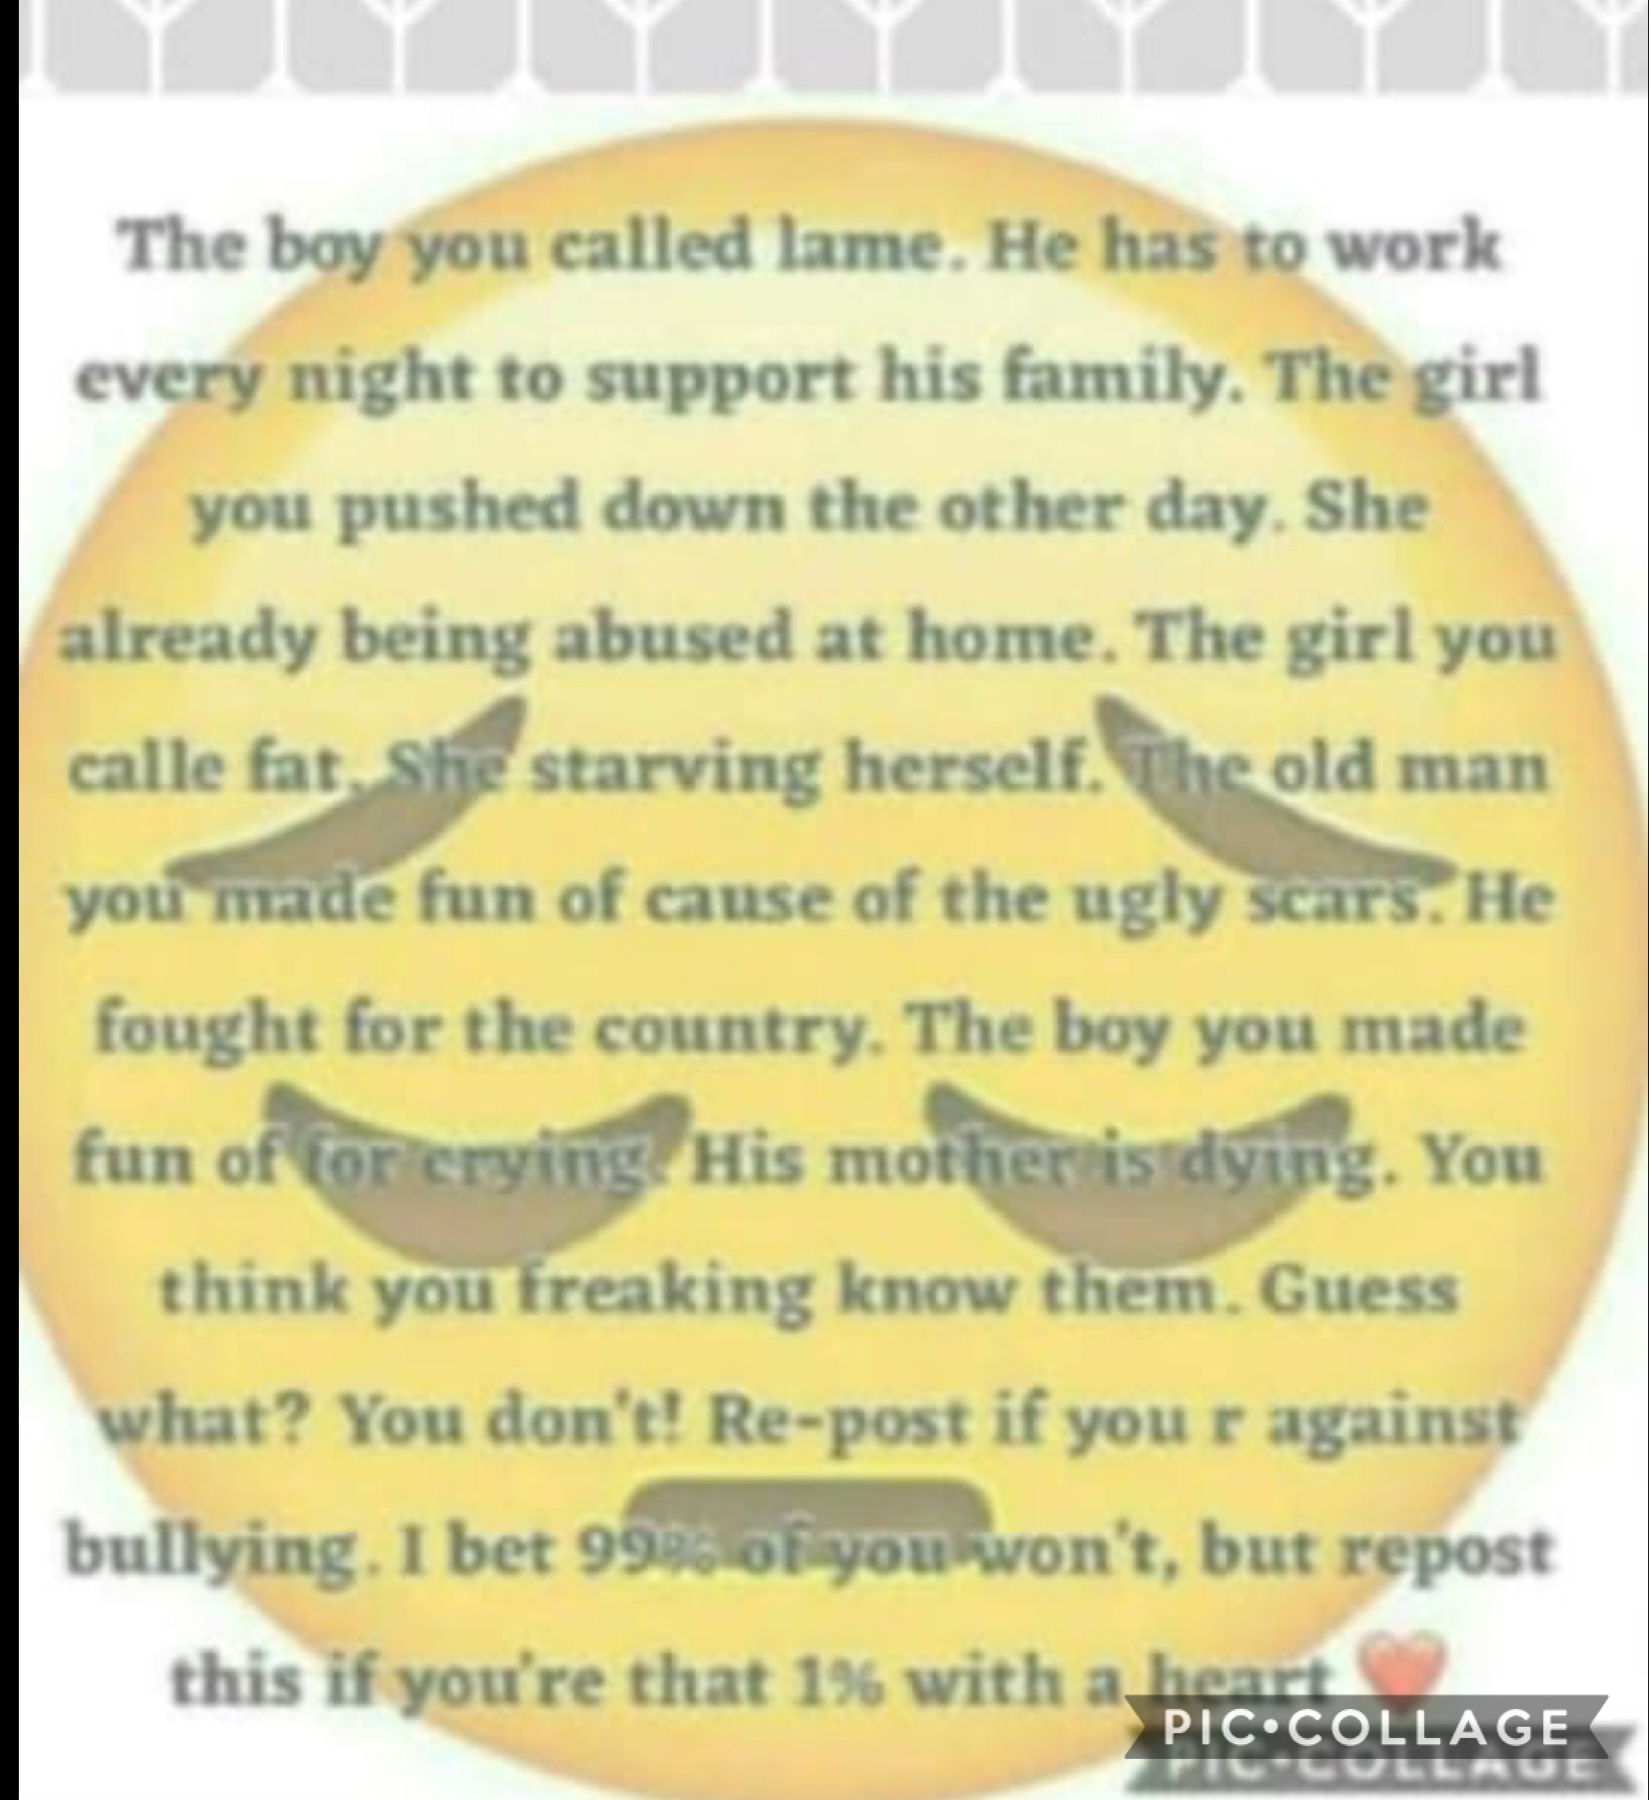 Keep re posting this so everyone can hear its message. ❌ no Bullying!